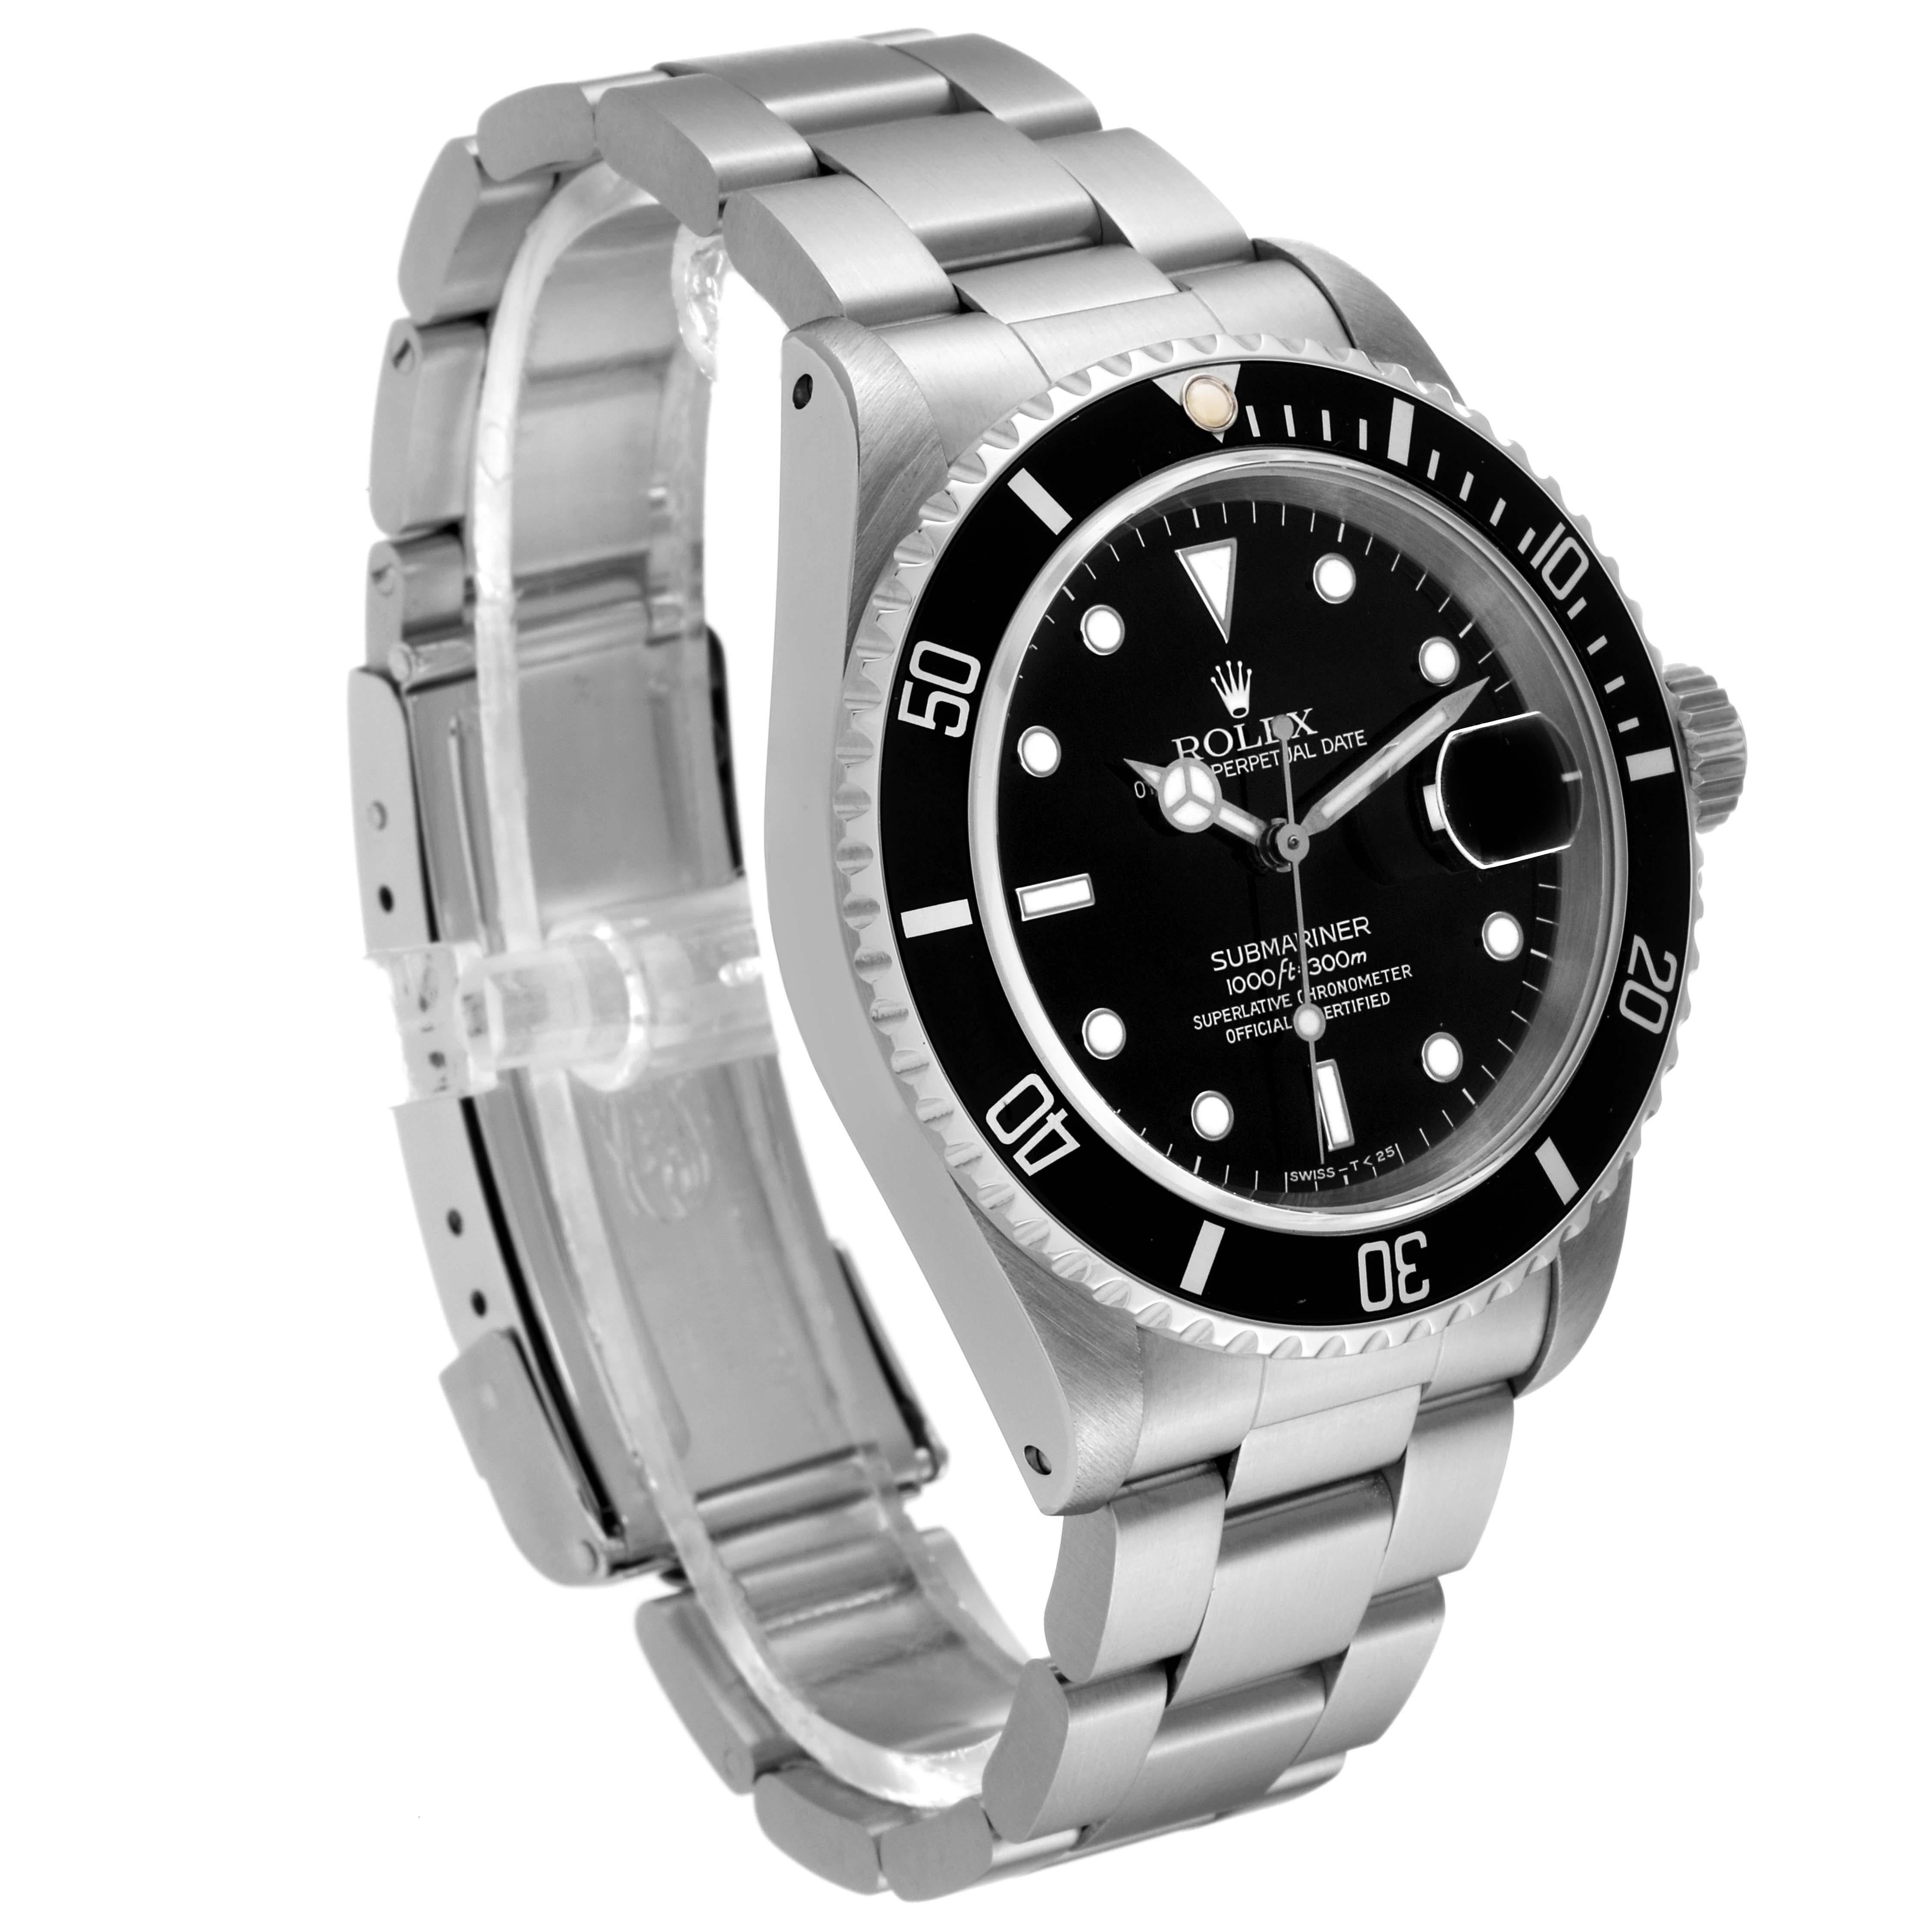 Rolex Submariner Date Black Frosted Dial Steel Mens Watch 16610 Box Papers en vente 1